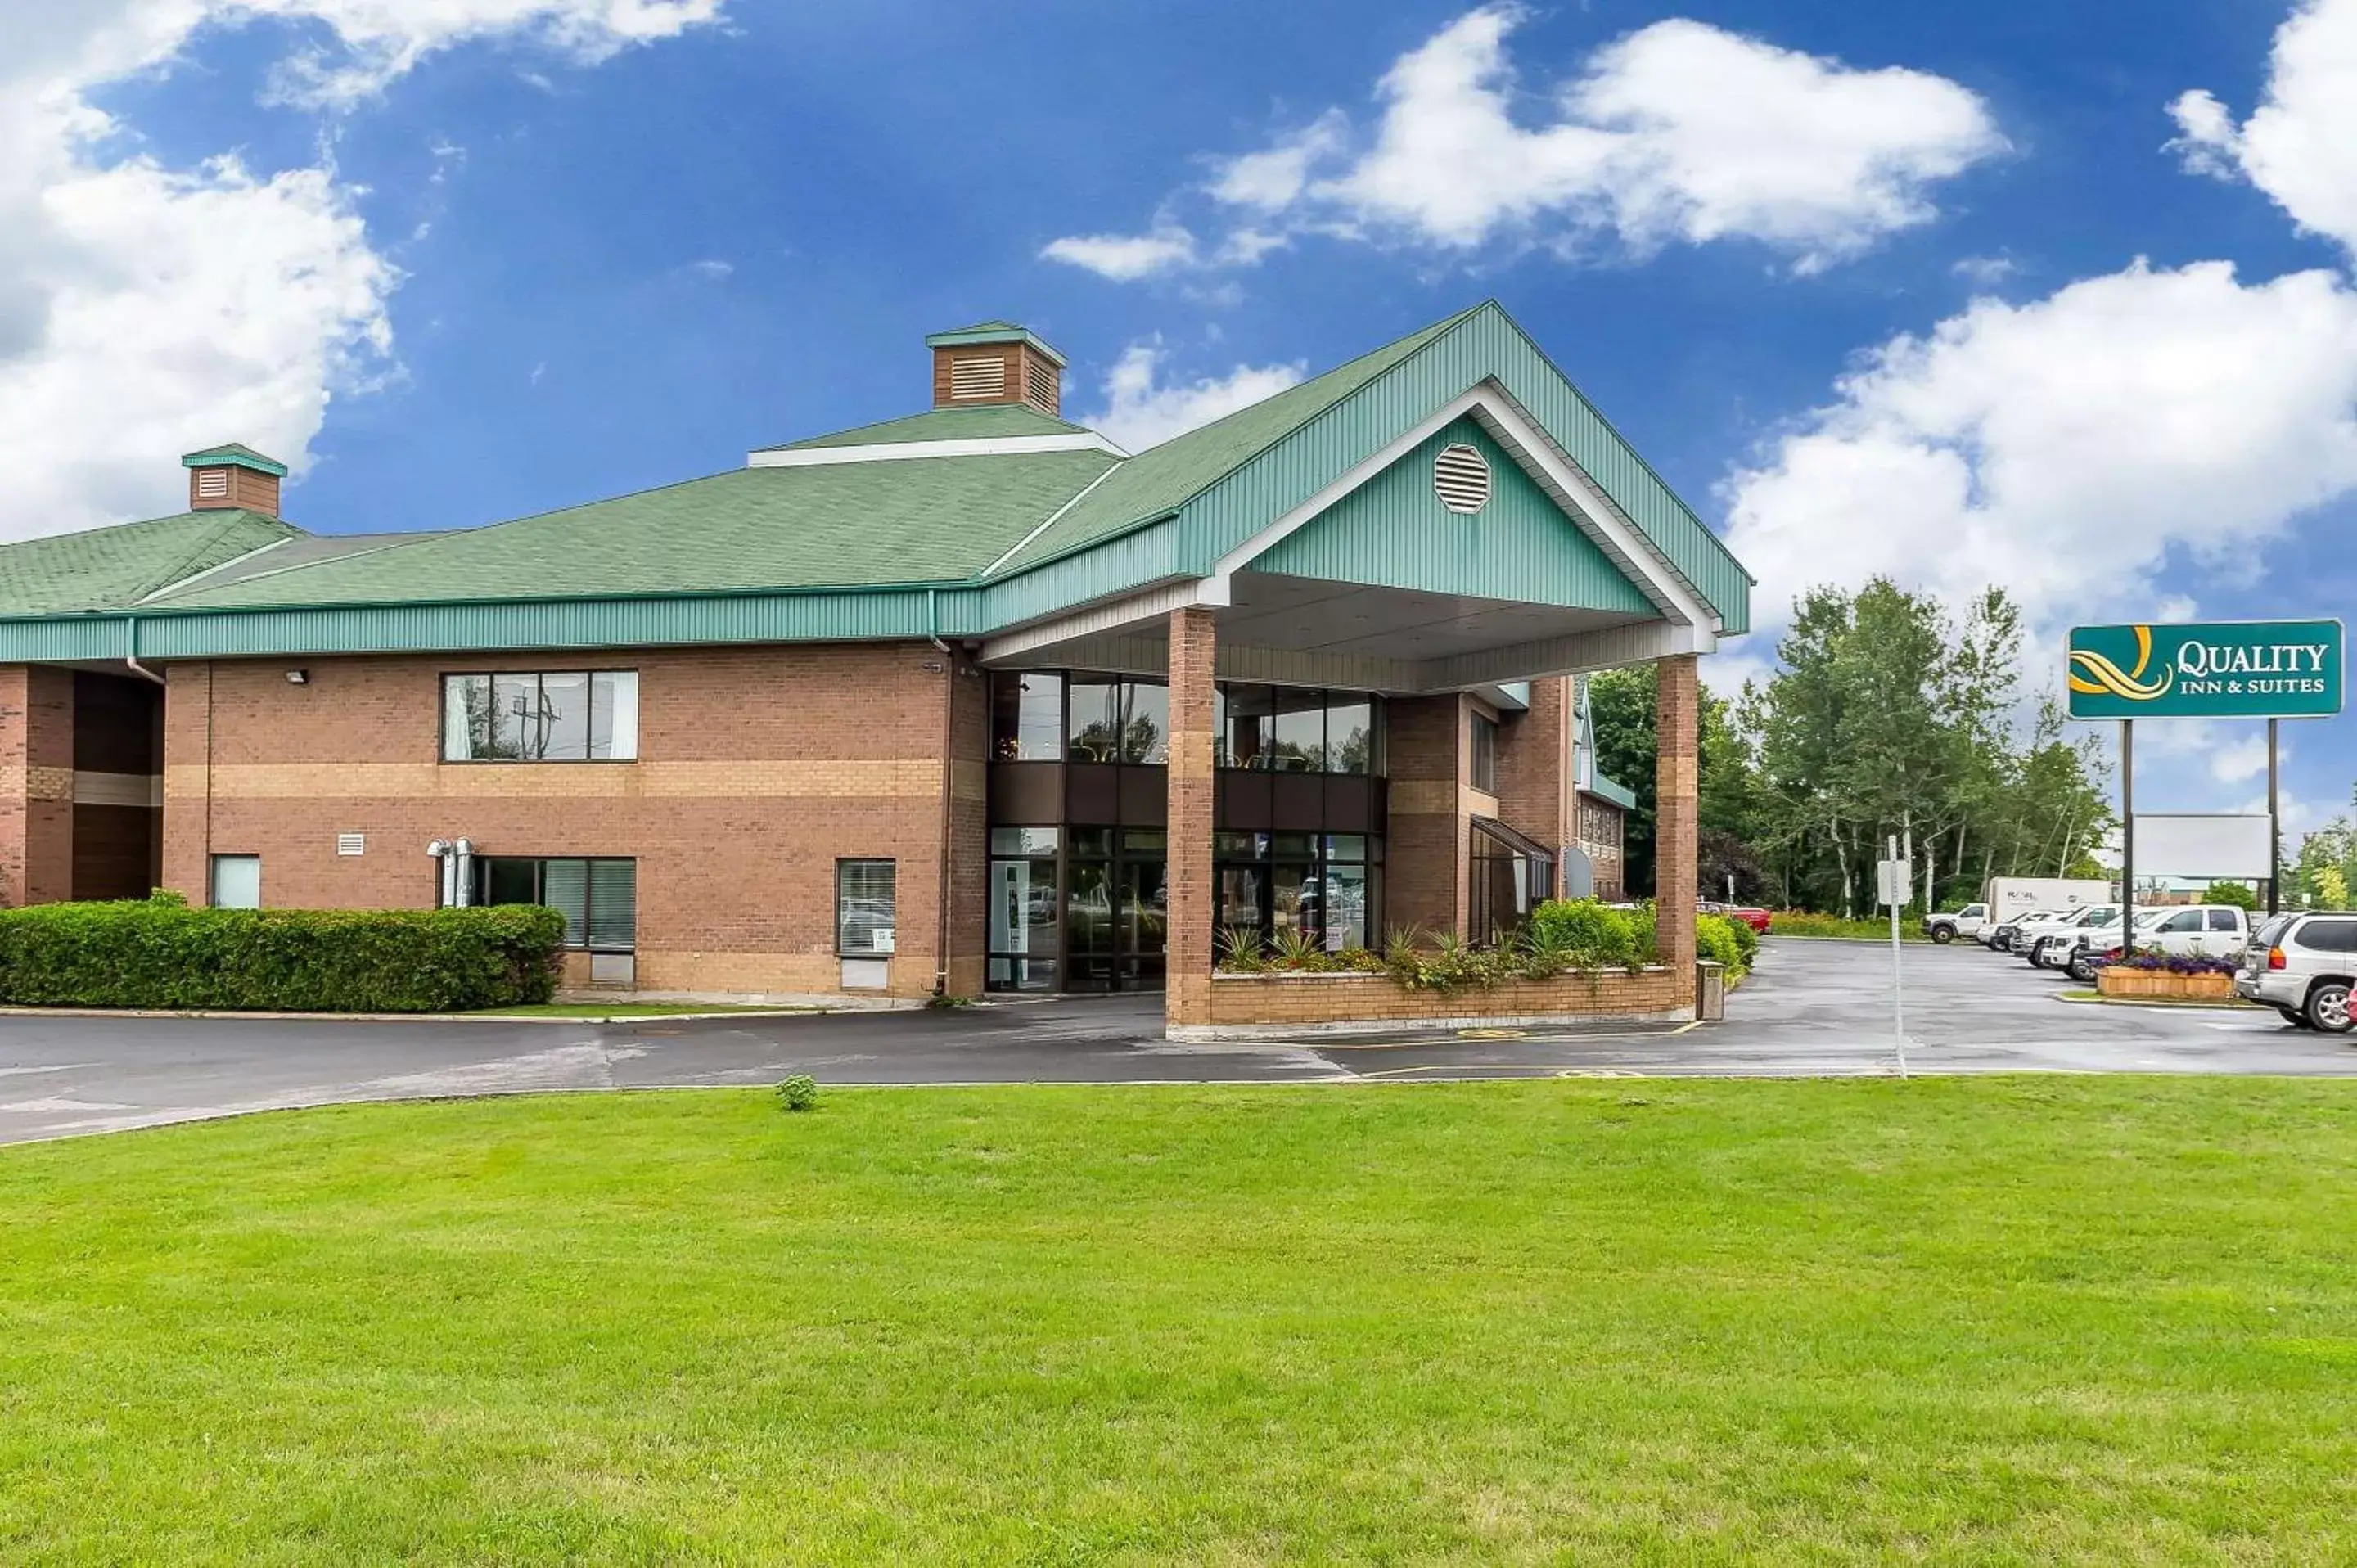 Property building in Quality Inn & Suites Hawkesbury